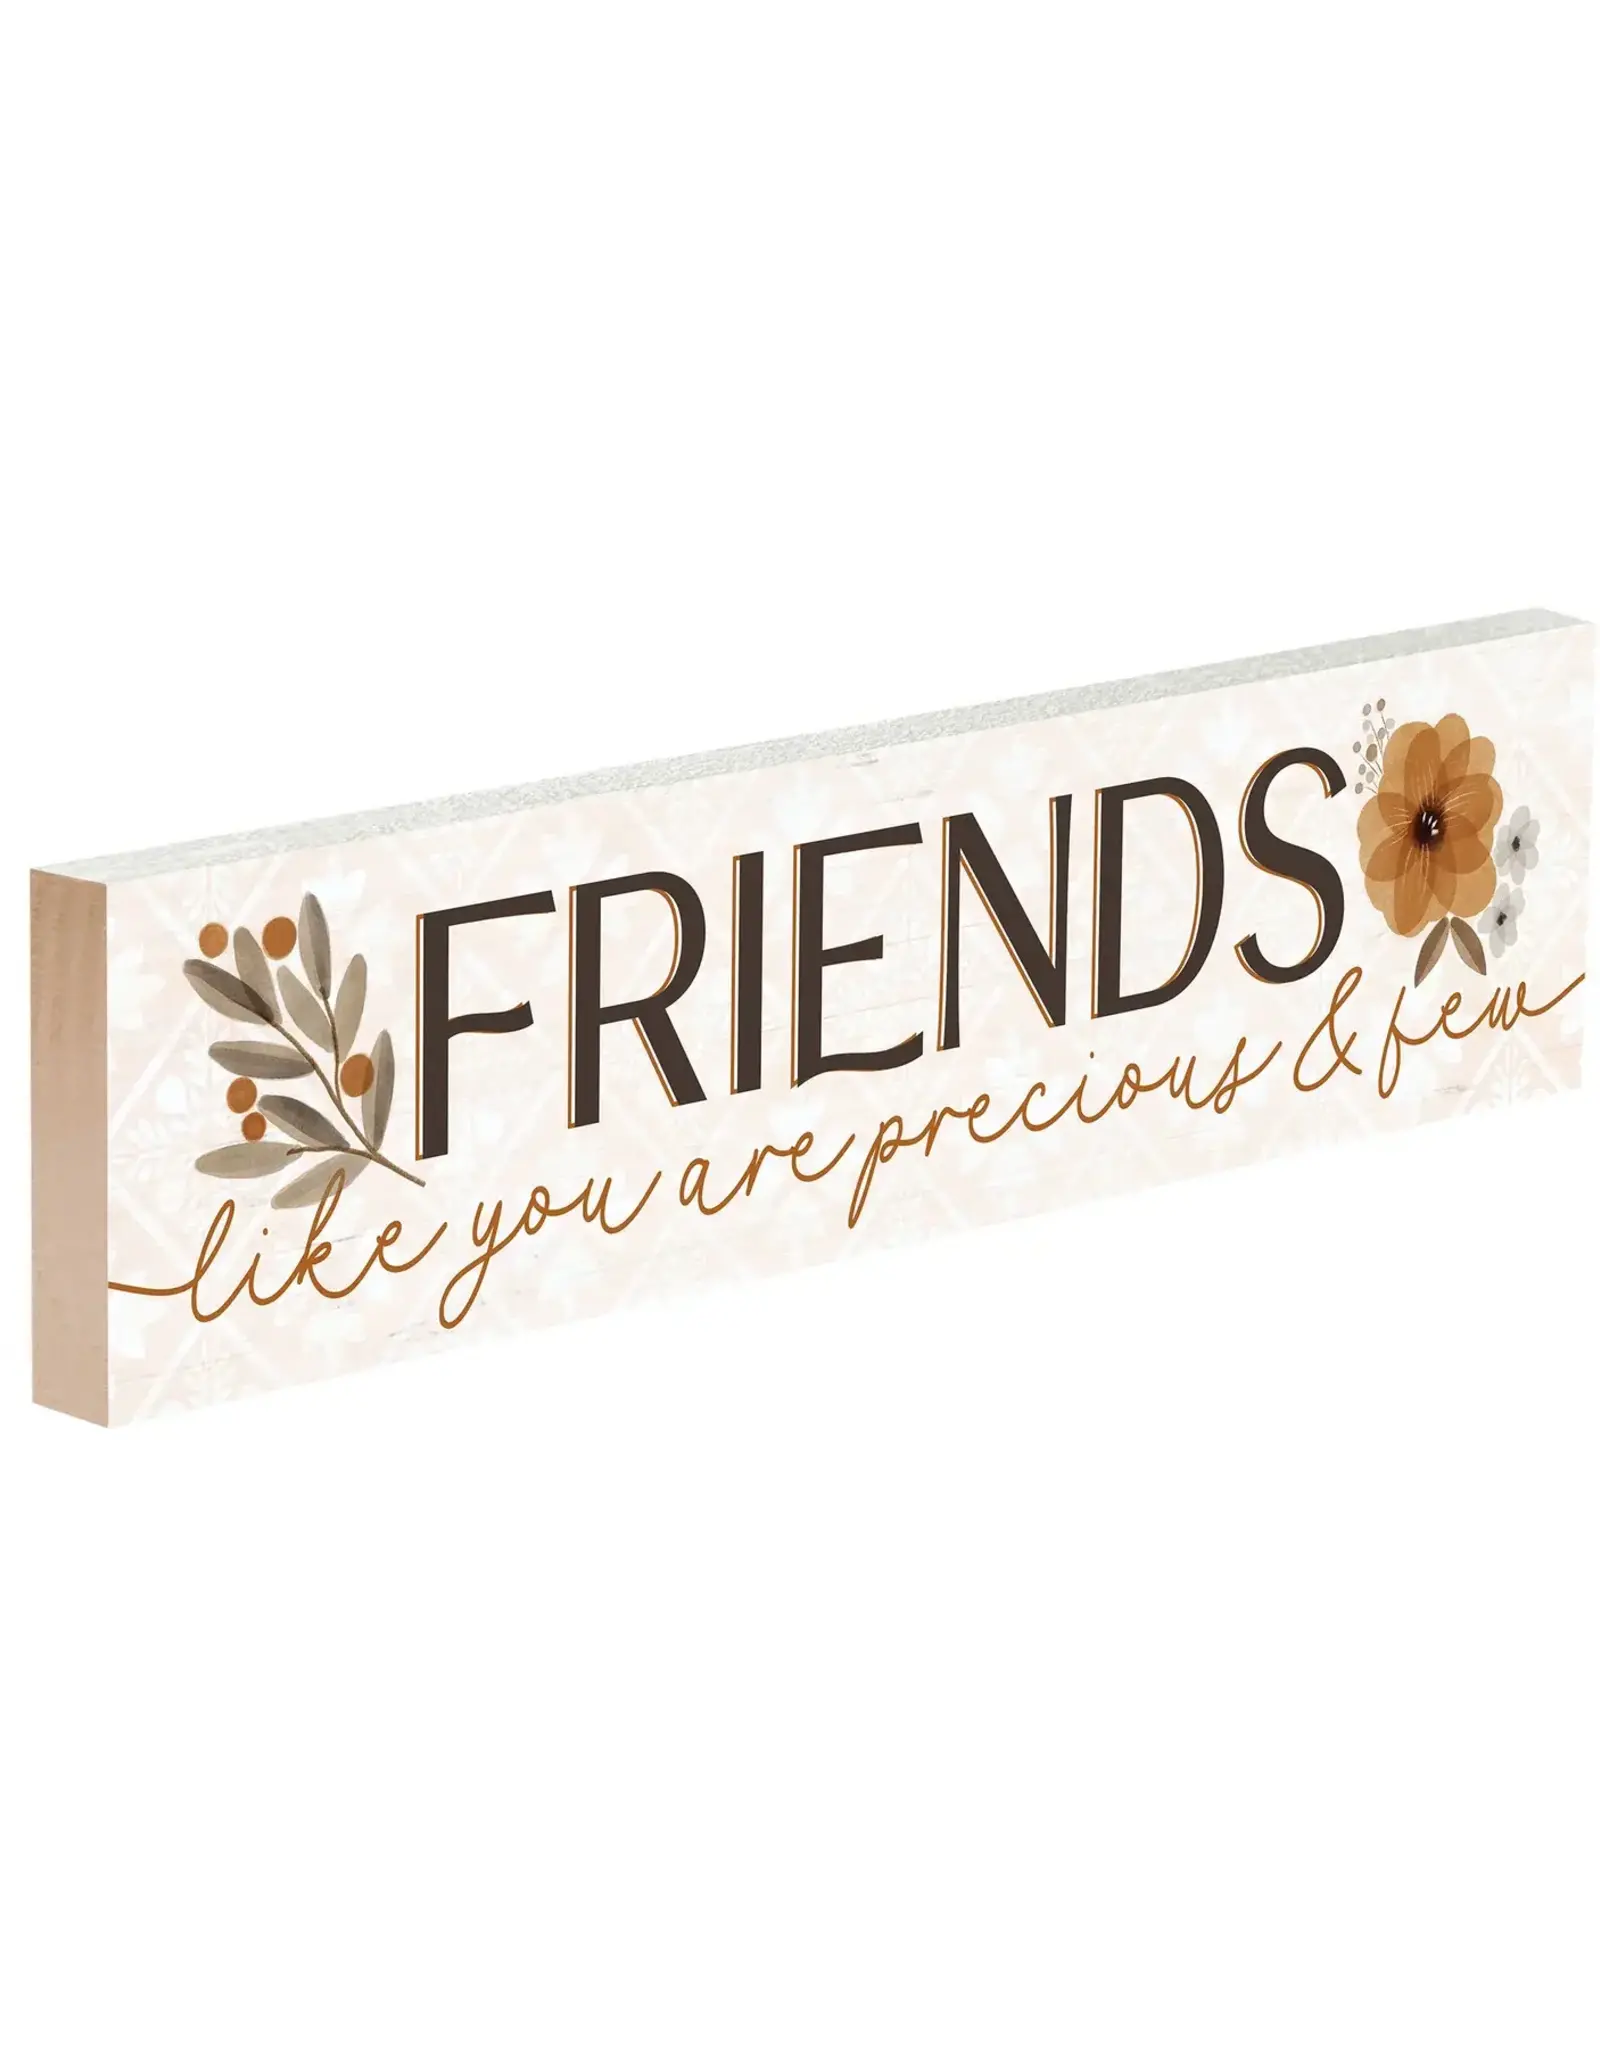 Friends Like You Are Precious And Few Wooden Sign